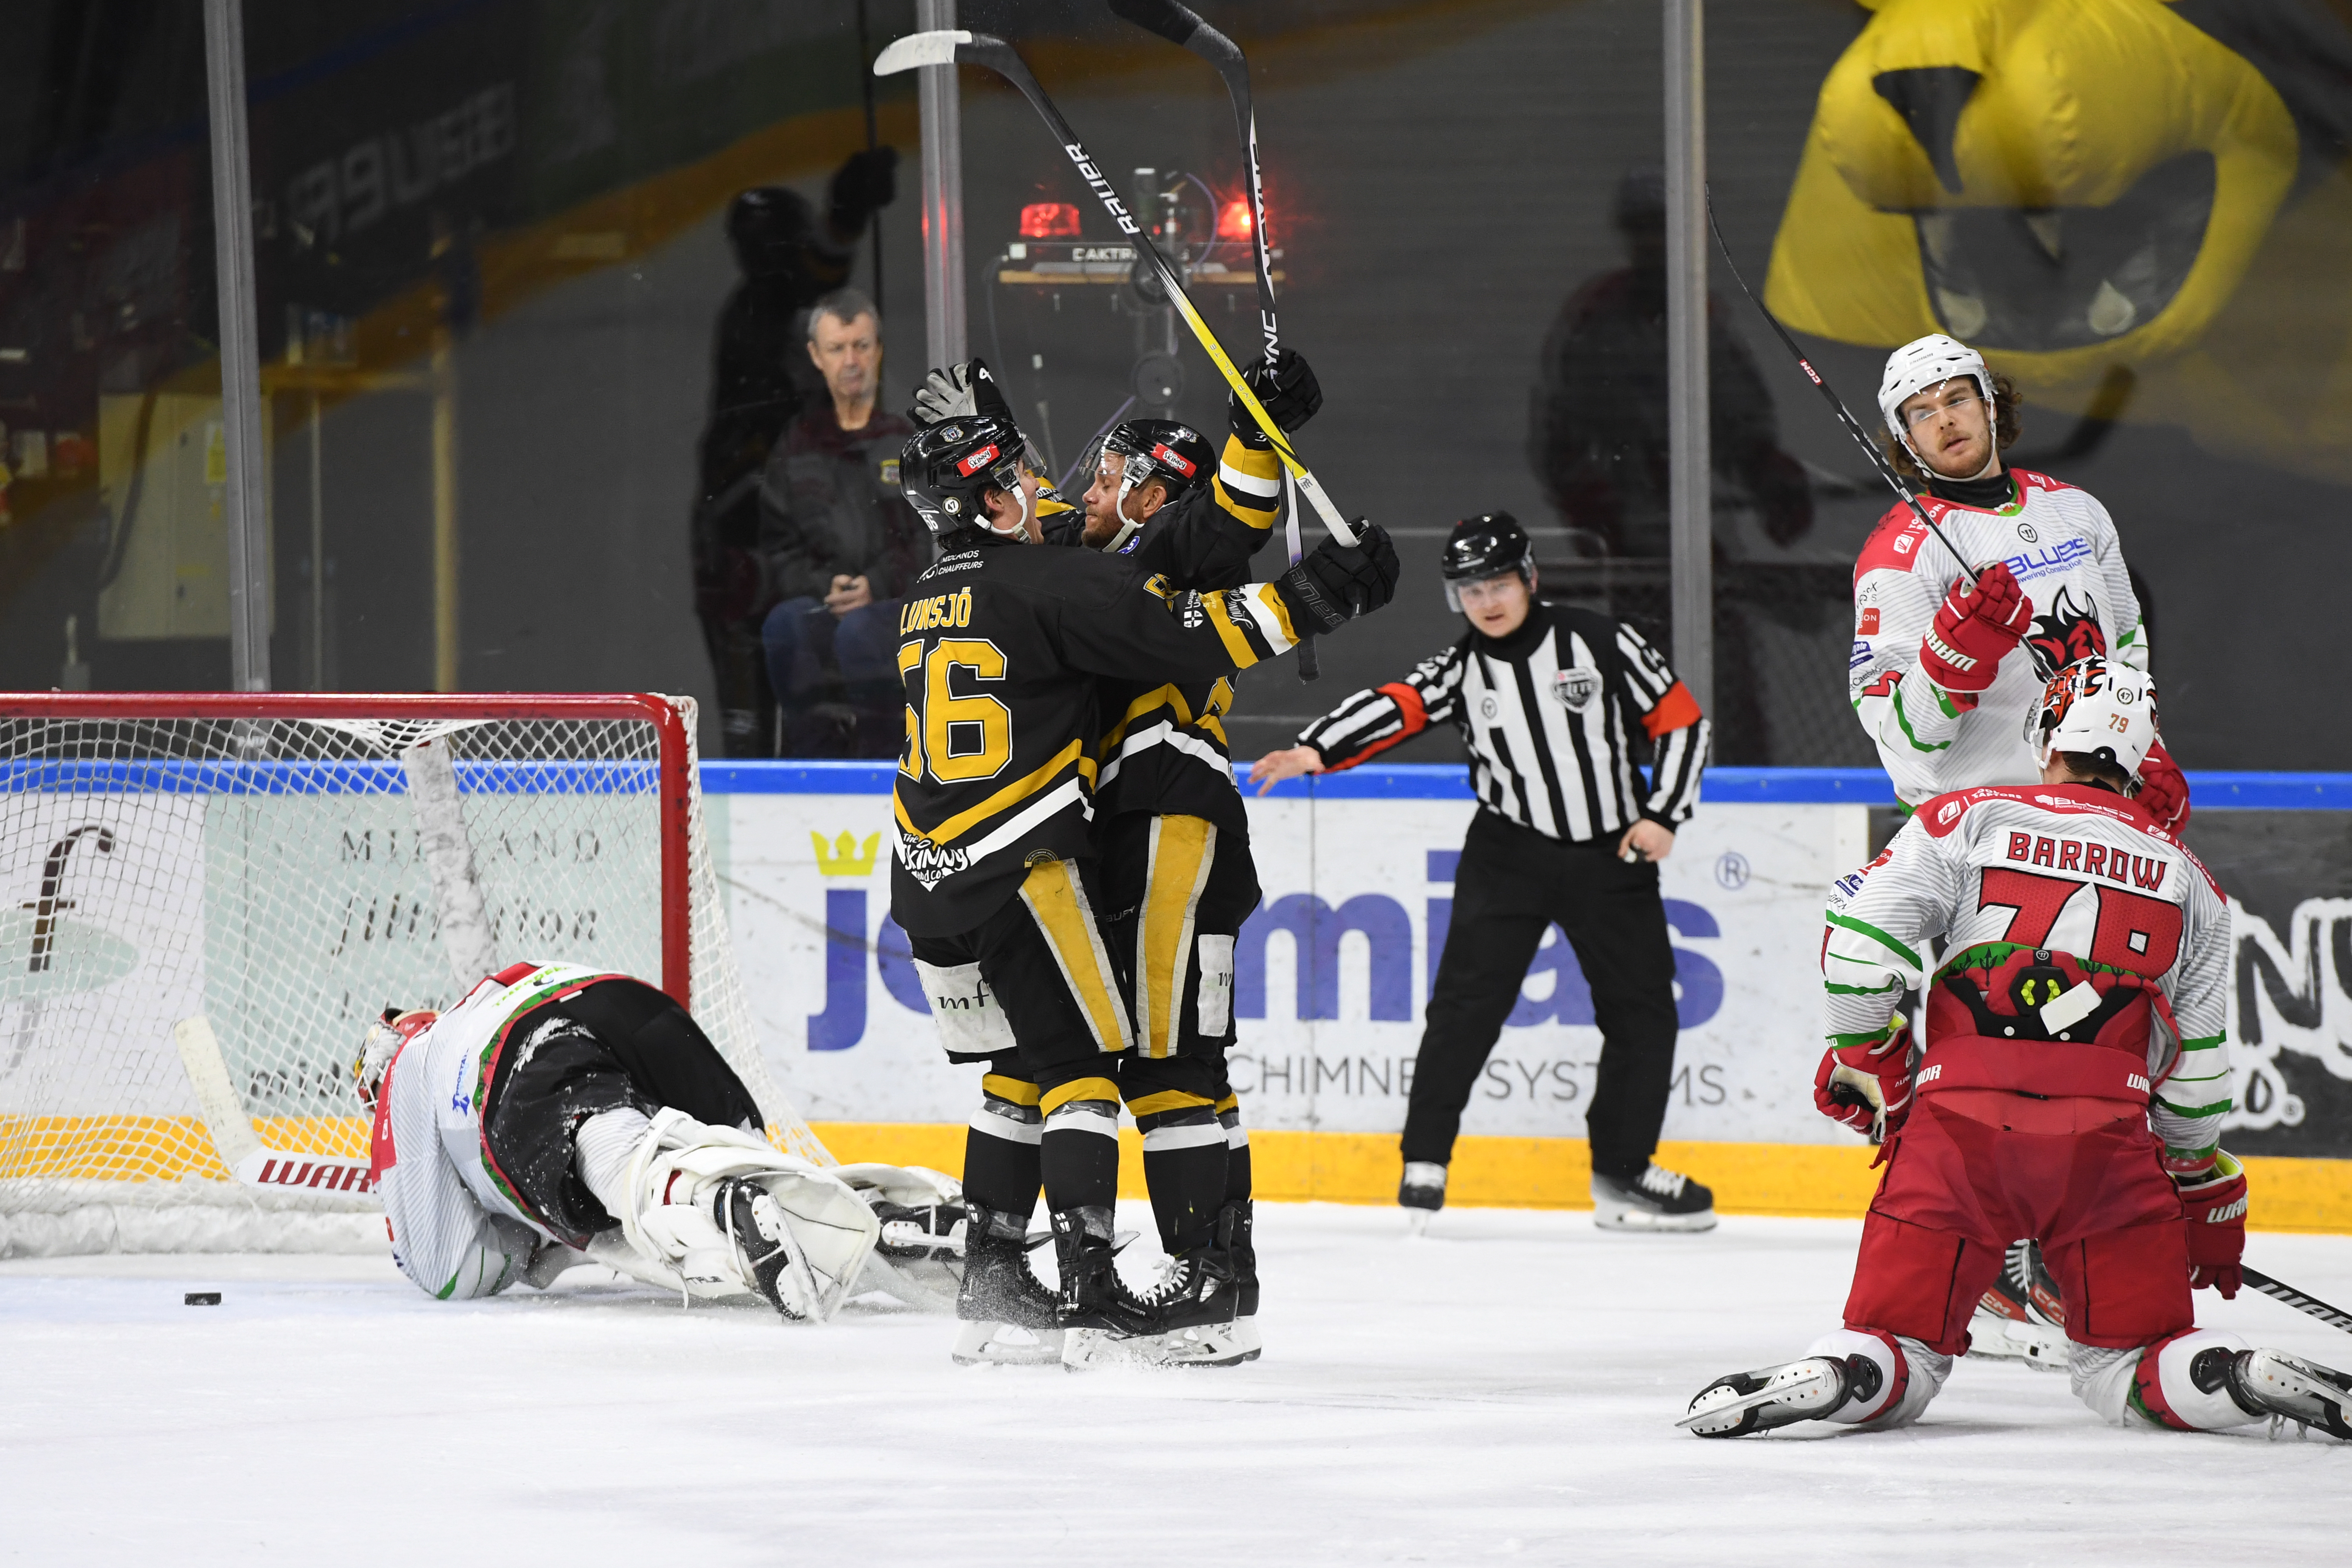 RELIVE THE BEST BITS FROM WEDNESDAY'S WIN OVER DEVILS Top Image